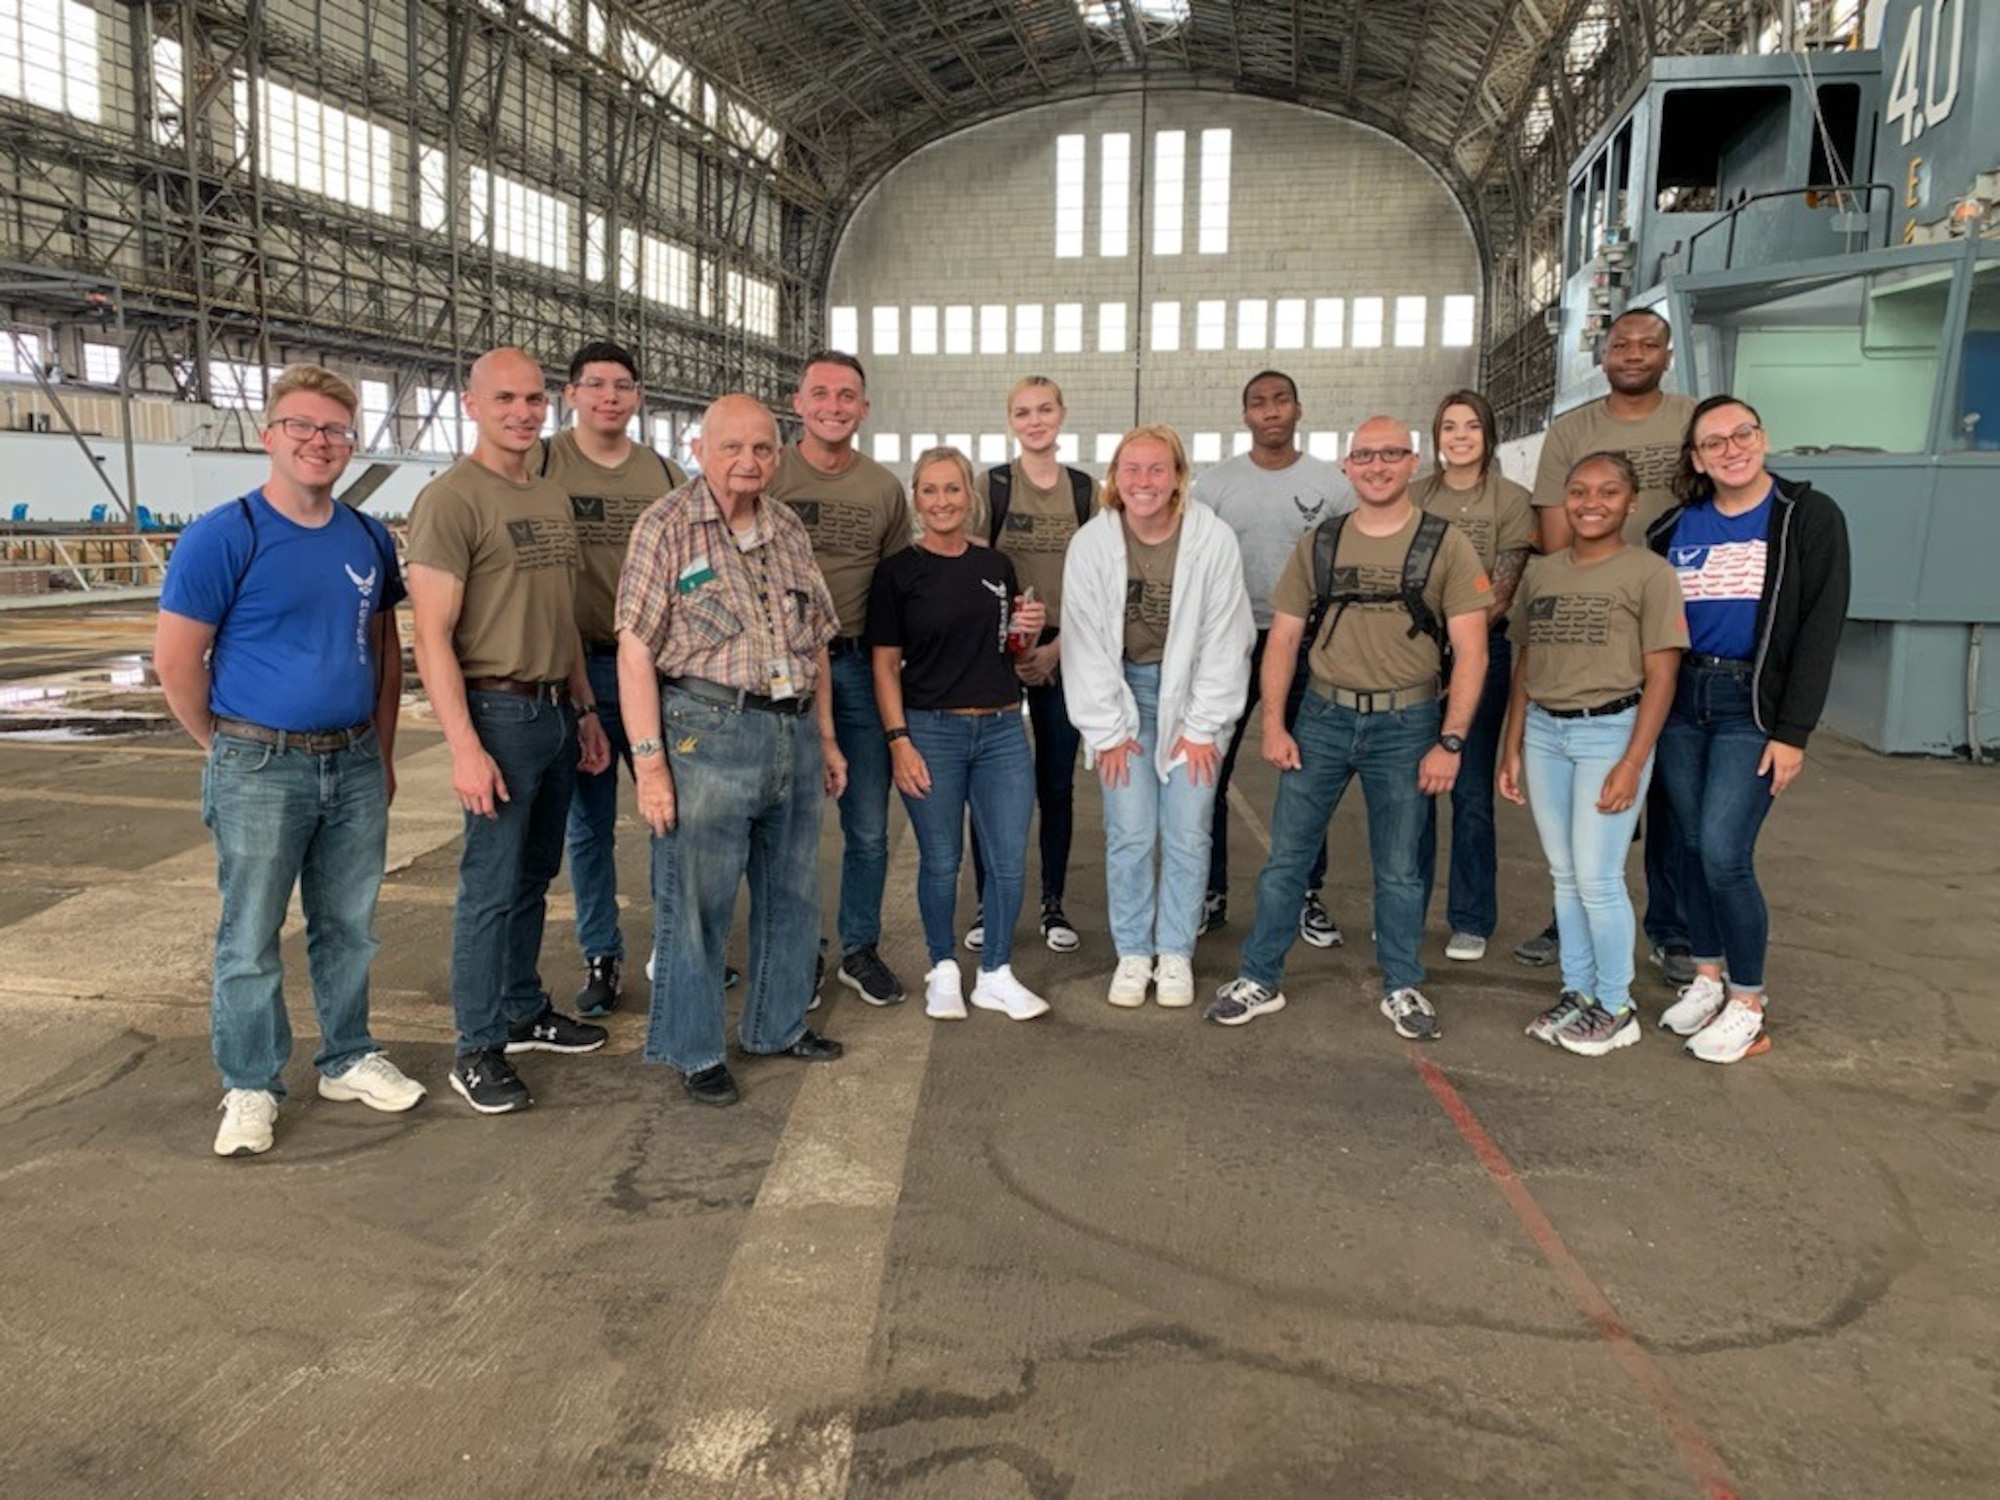 Trainees with the 514th Air Mobility Wing's Developmental Training Flight pose for a photo in Hangar One at Navy Lakehurst. The group toured the legendary Hangar One with Mr. Carl Jablonski, affectionately called Mr. Lakehurst, and Mr. Don Adams from the Navy Lakehurst Historical Society.